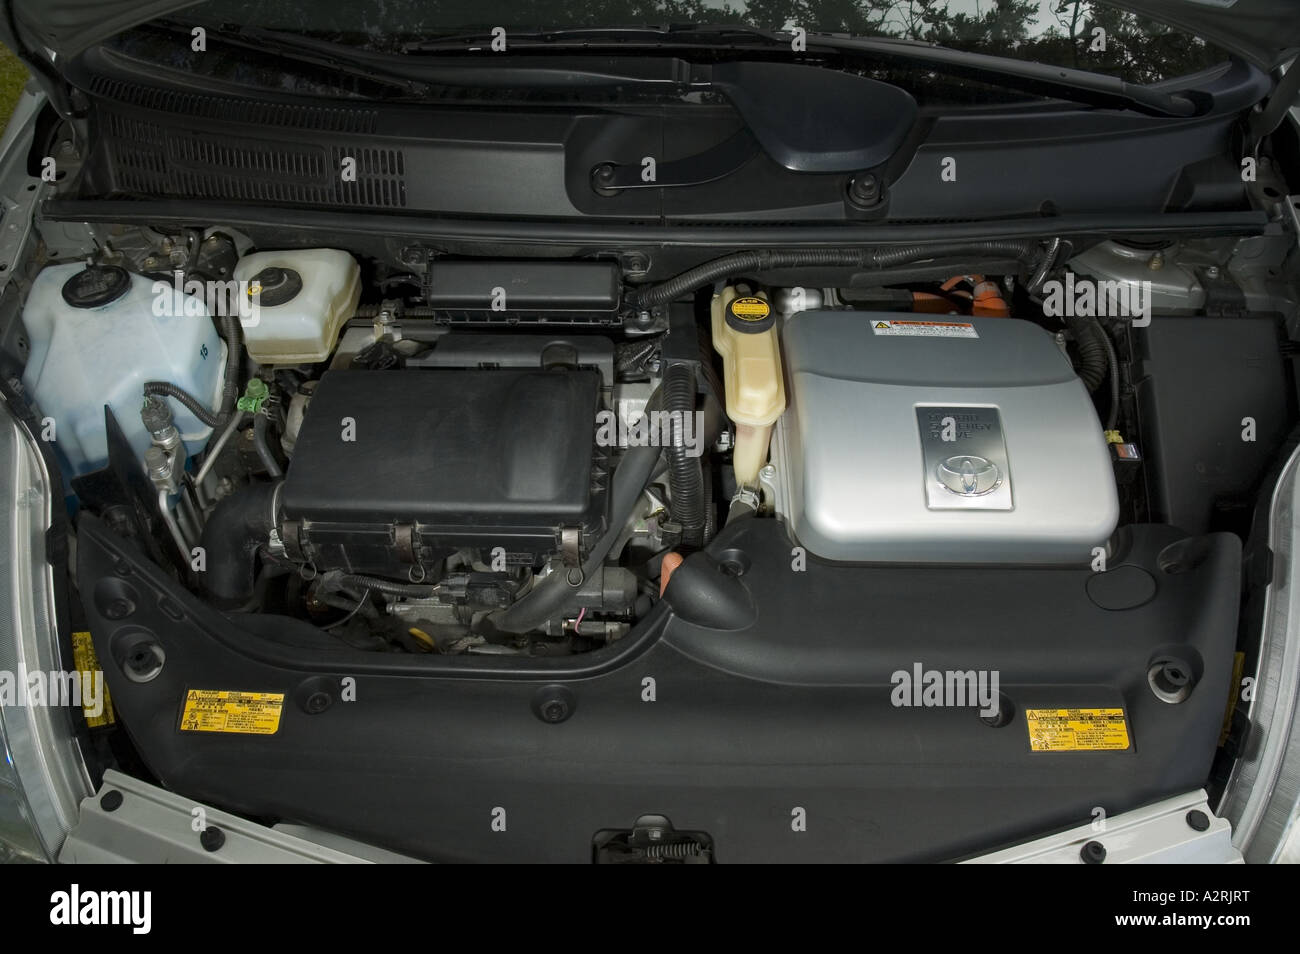 ENGINE IN 2004 TOYOTA PRIUS GASOLINE-ELECTRIC HYBRID CAR Stock Photo